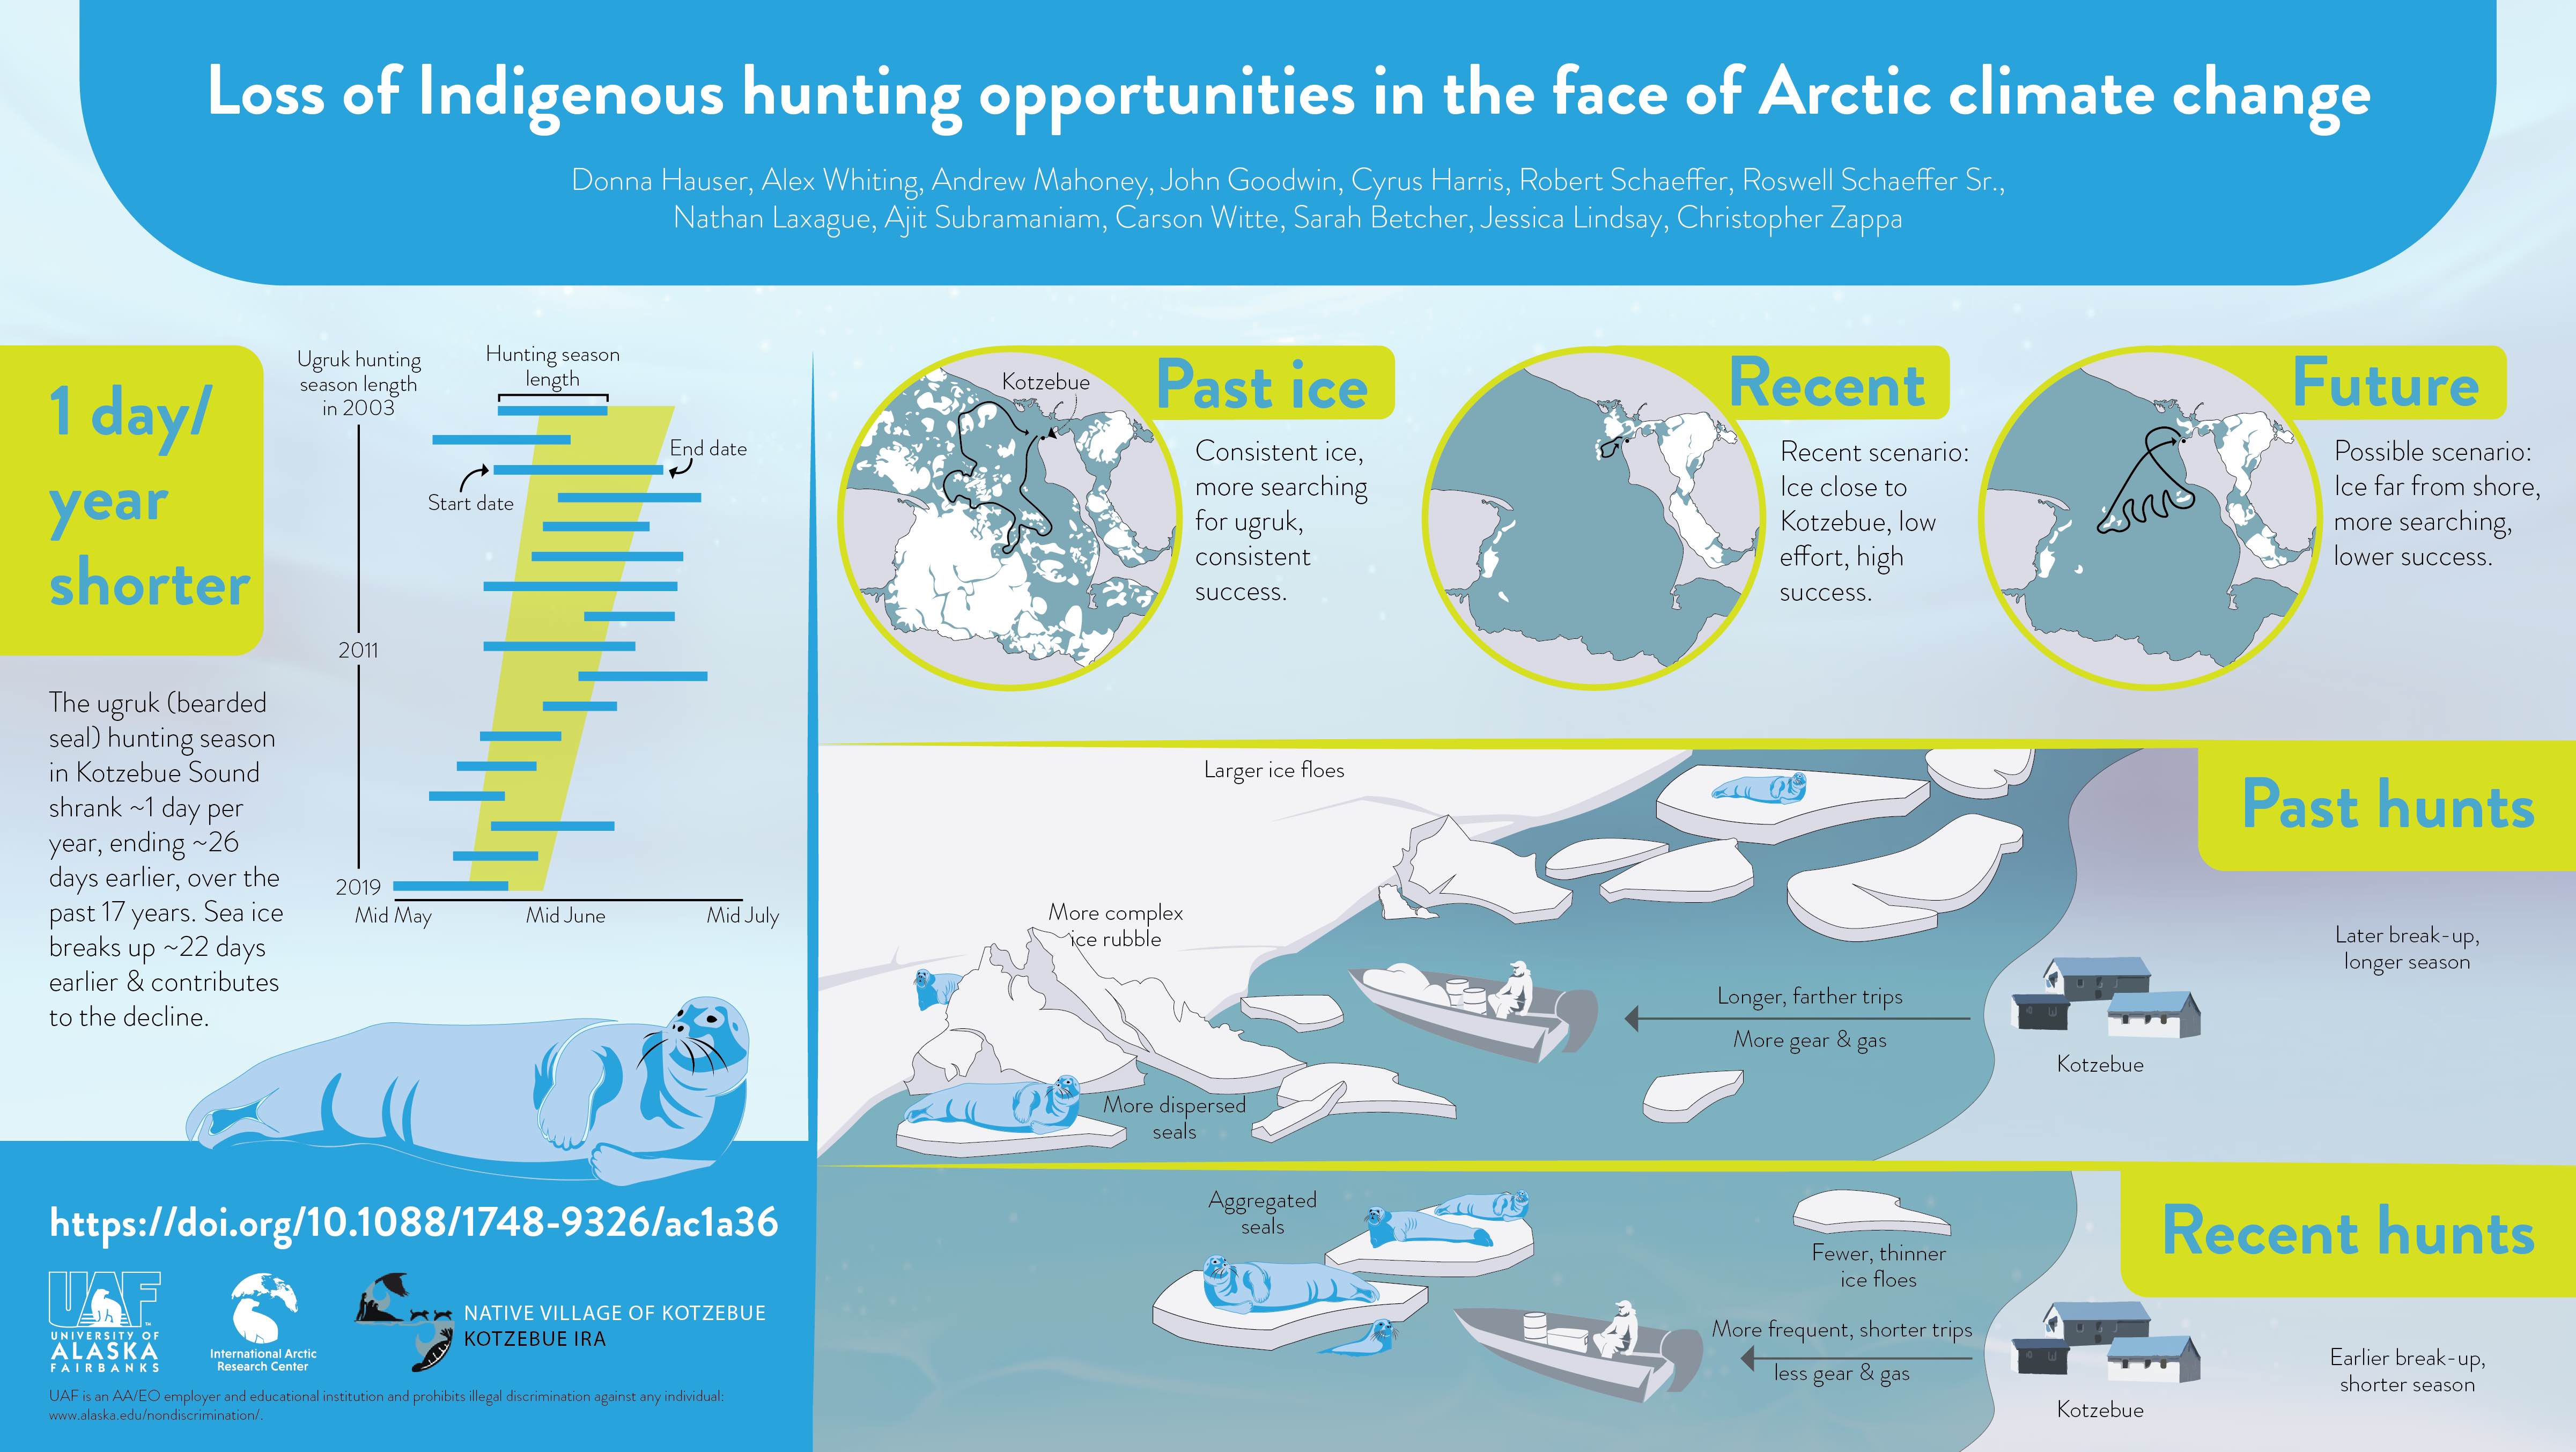 This graphic illustrates the key findings of the research, which merged Indigenous knowledge, tribal records and satellite data to demonstrate that the bearded seal hunting season in Kotzebue, Alaska, is shrinking. 